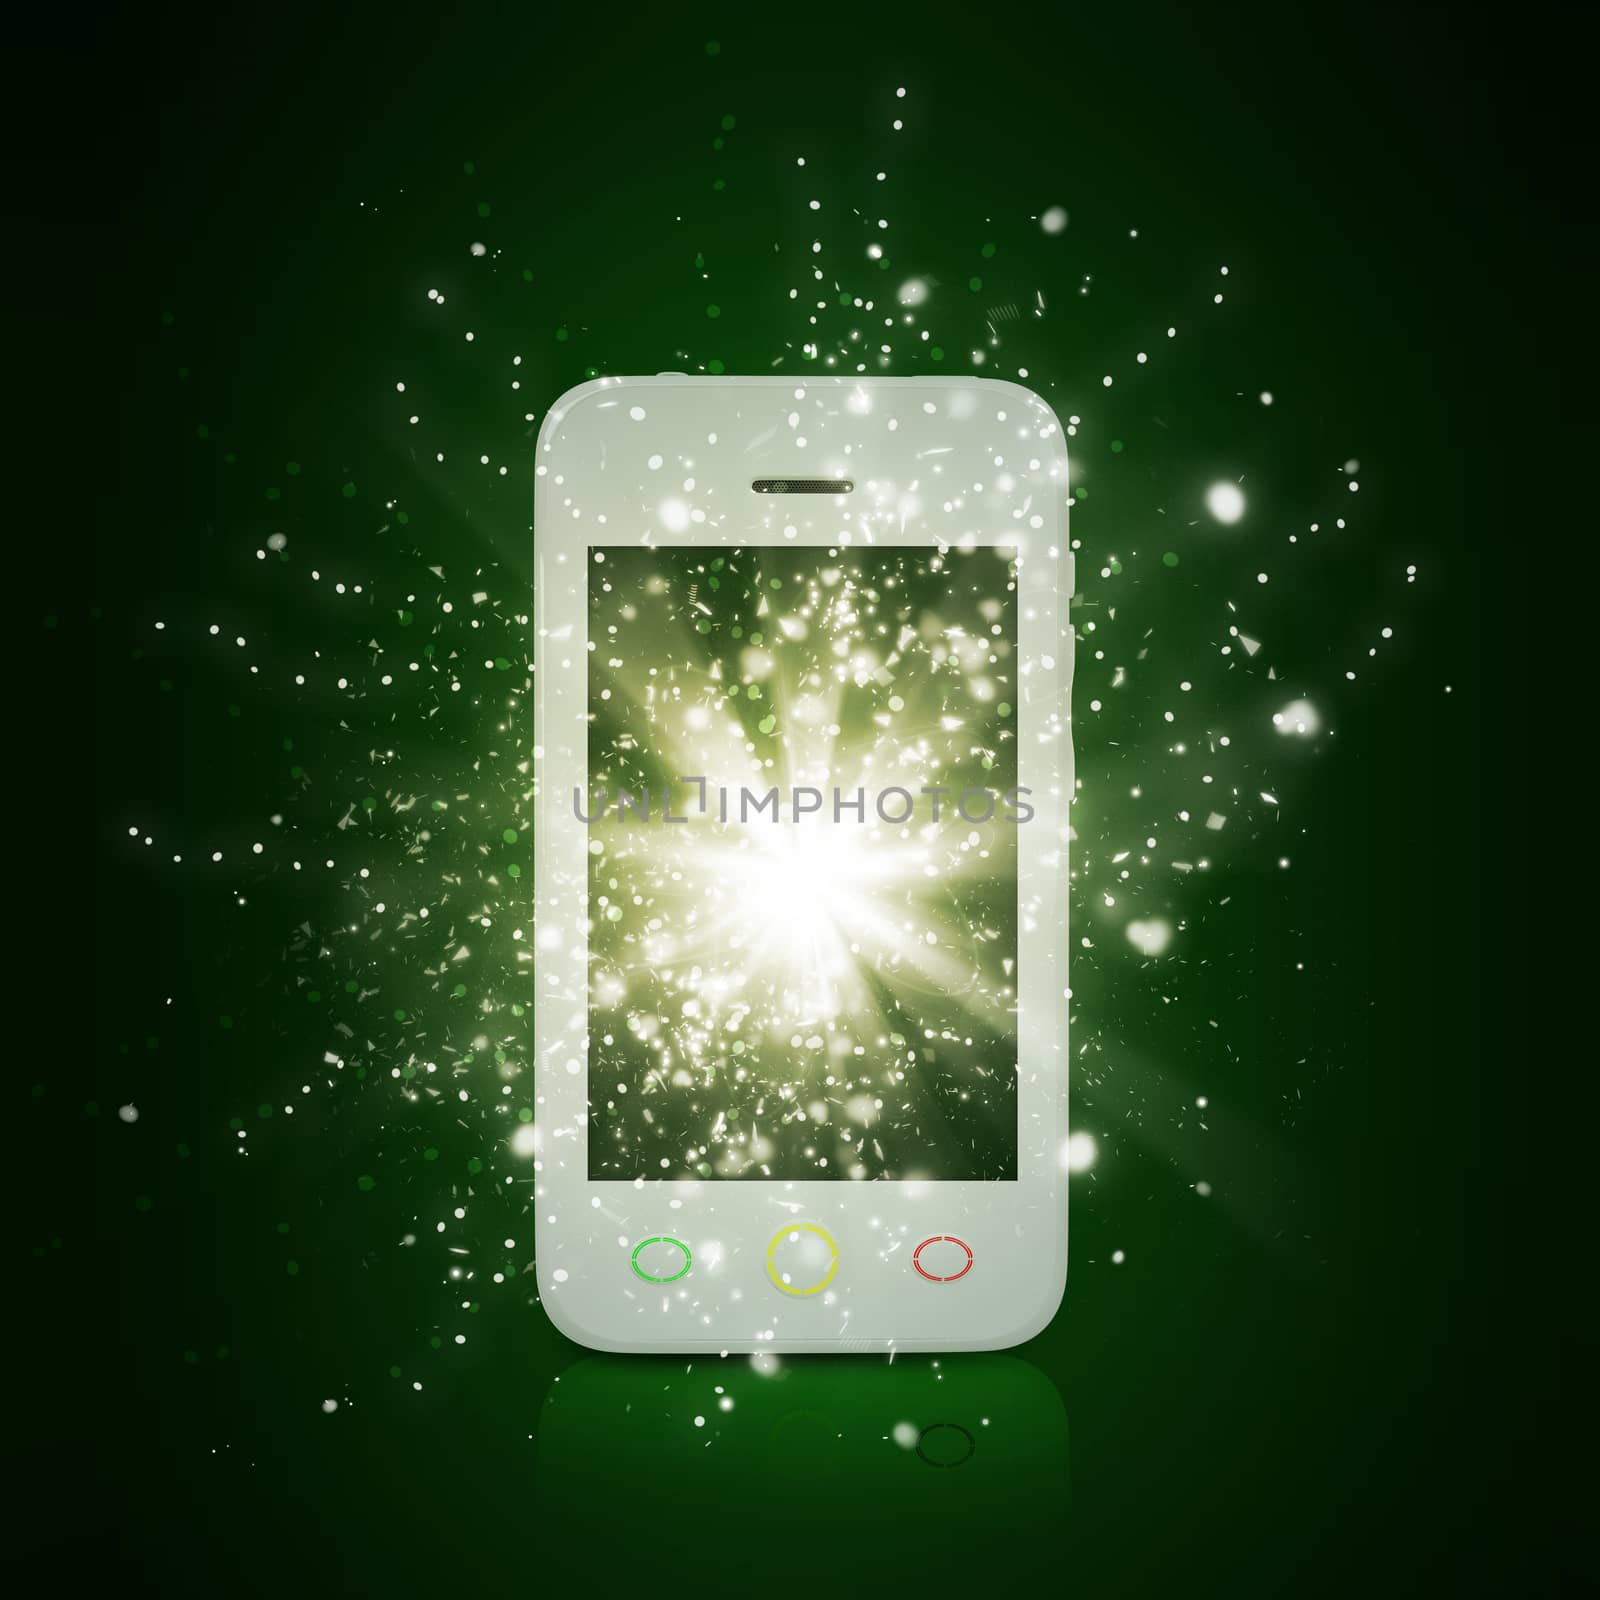 Smart phone with magic light and falling stars by cherezoff